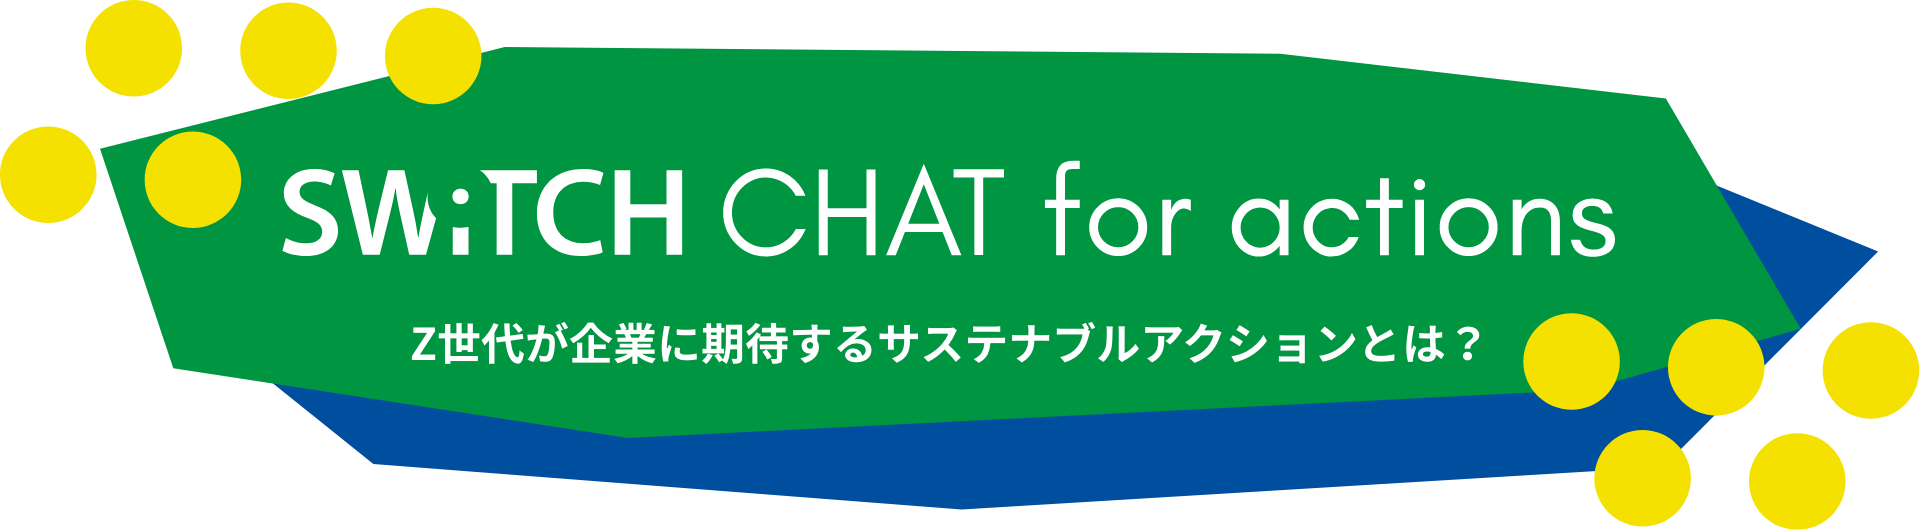 SWiTCH CHAT for actions Z世代が企業に期待するサステナブルアクションとは？